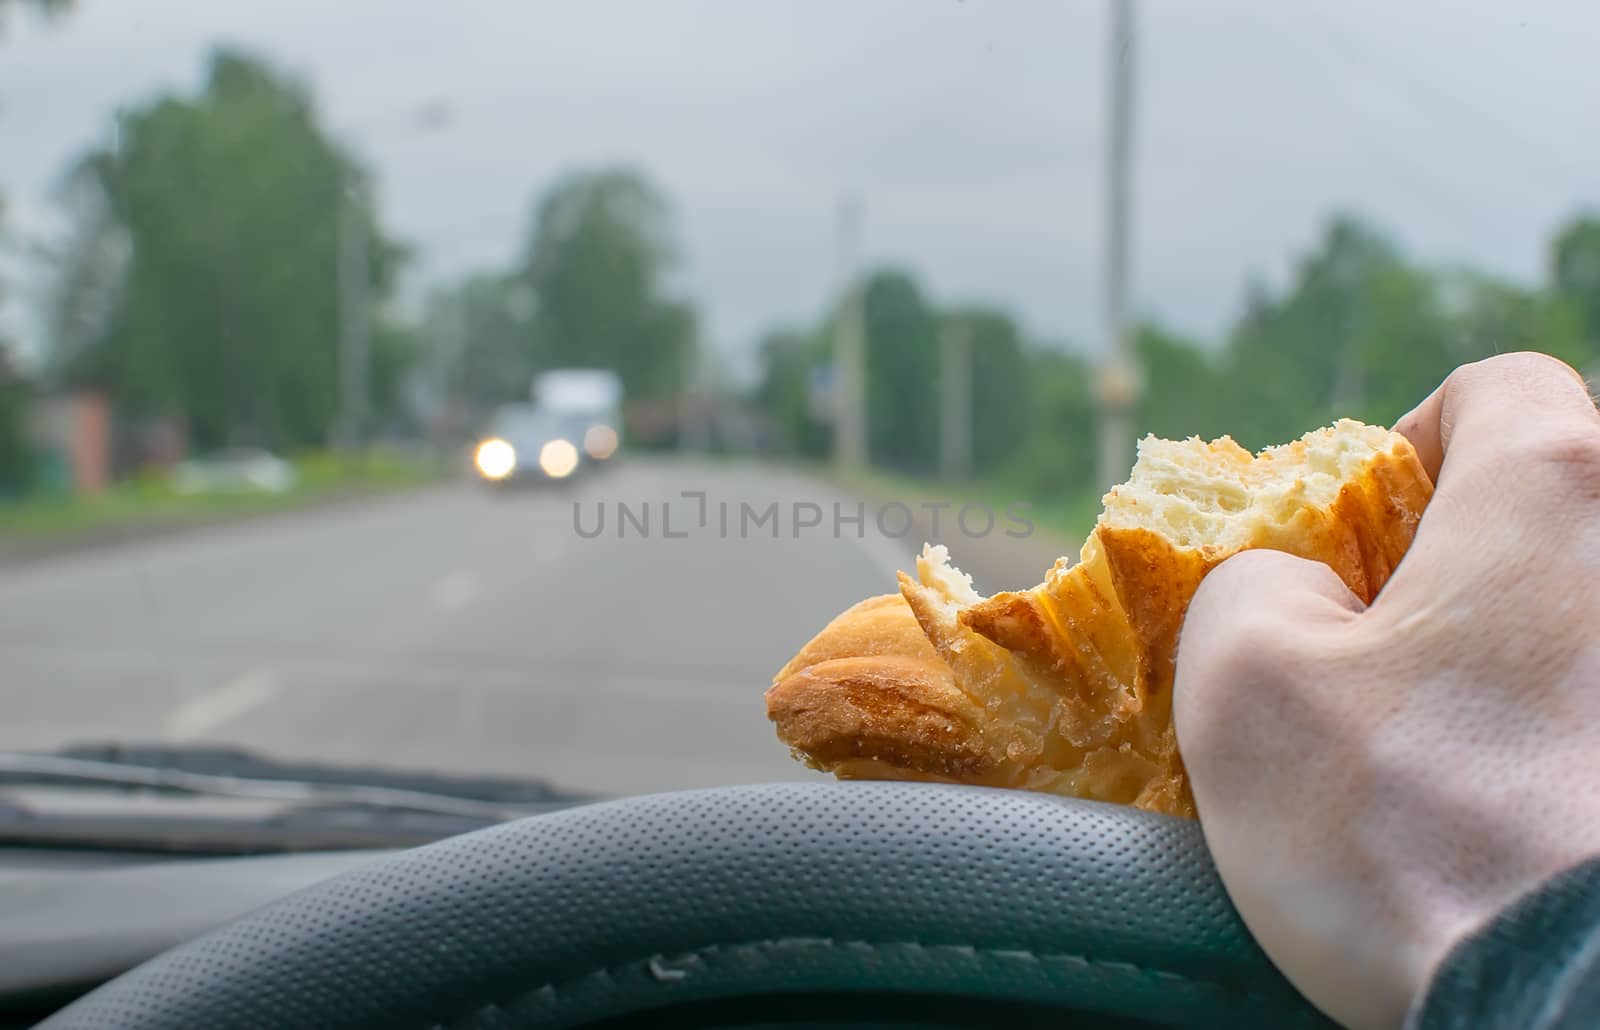 a bitten bun in the hand of a driver at the wheel of a car by jk3030